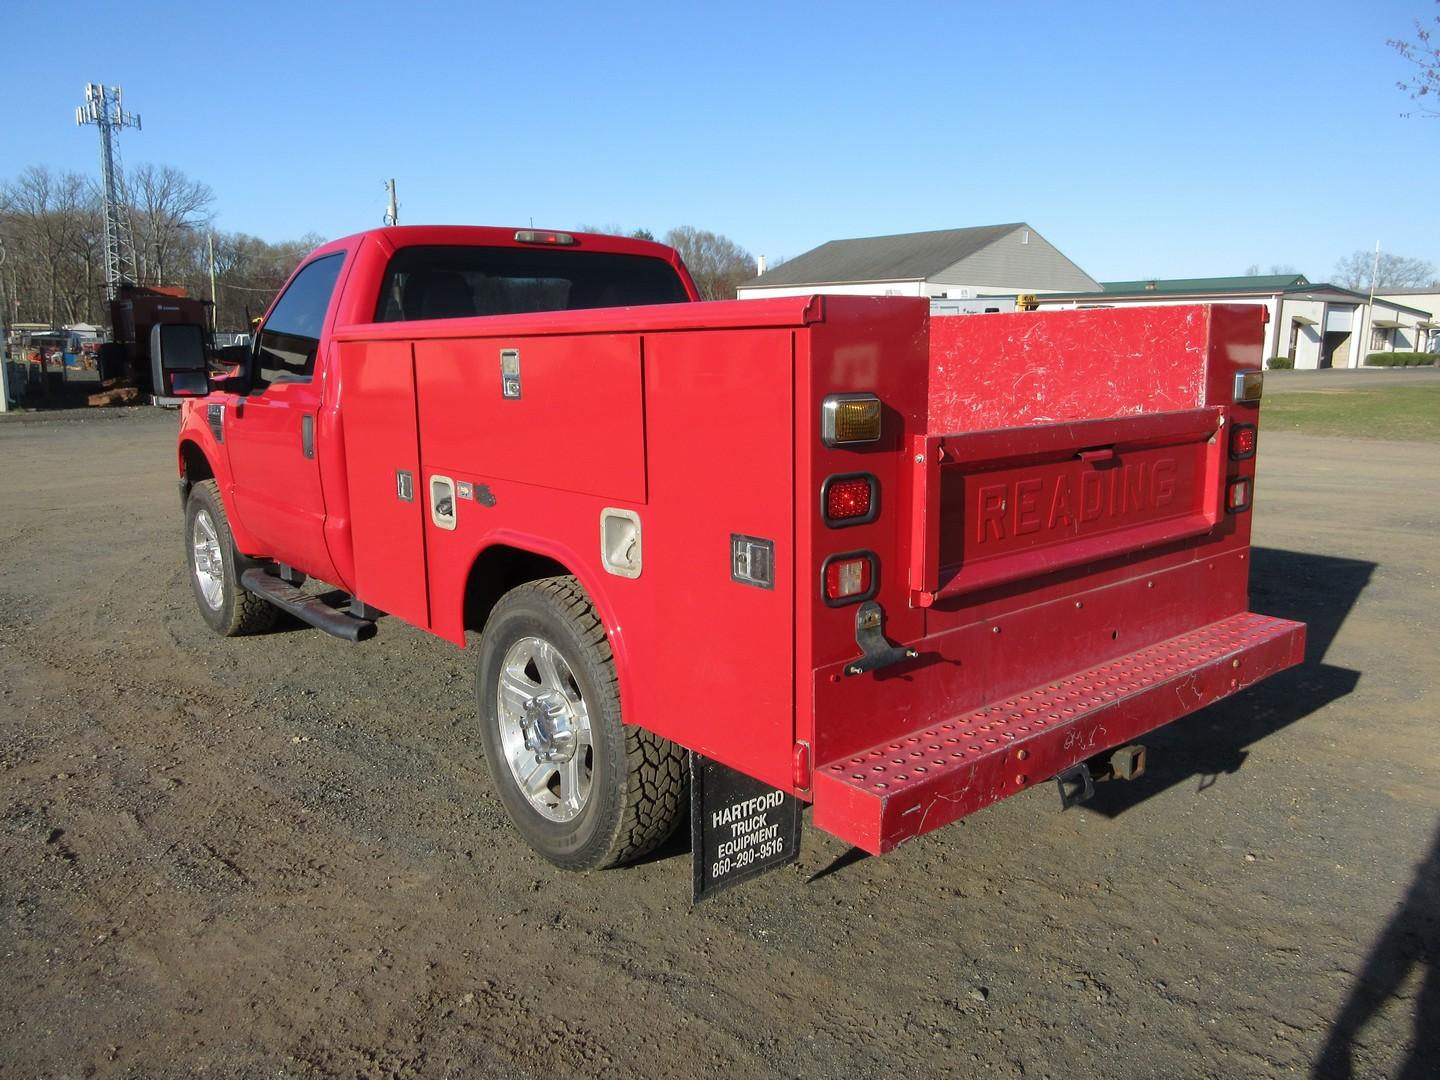 2010 Ford F-250 XL S/A Utility Truck